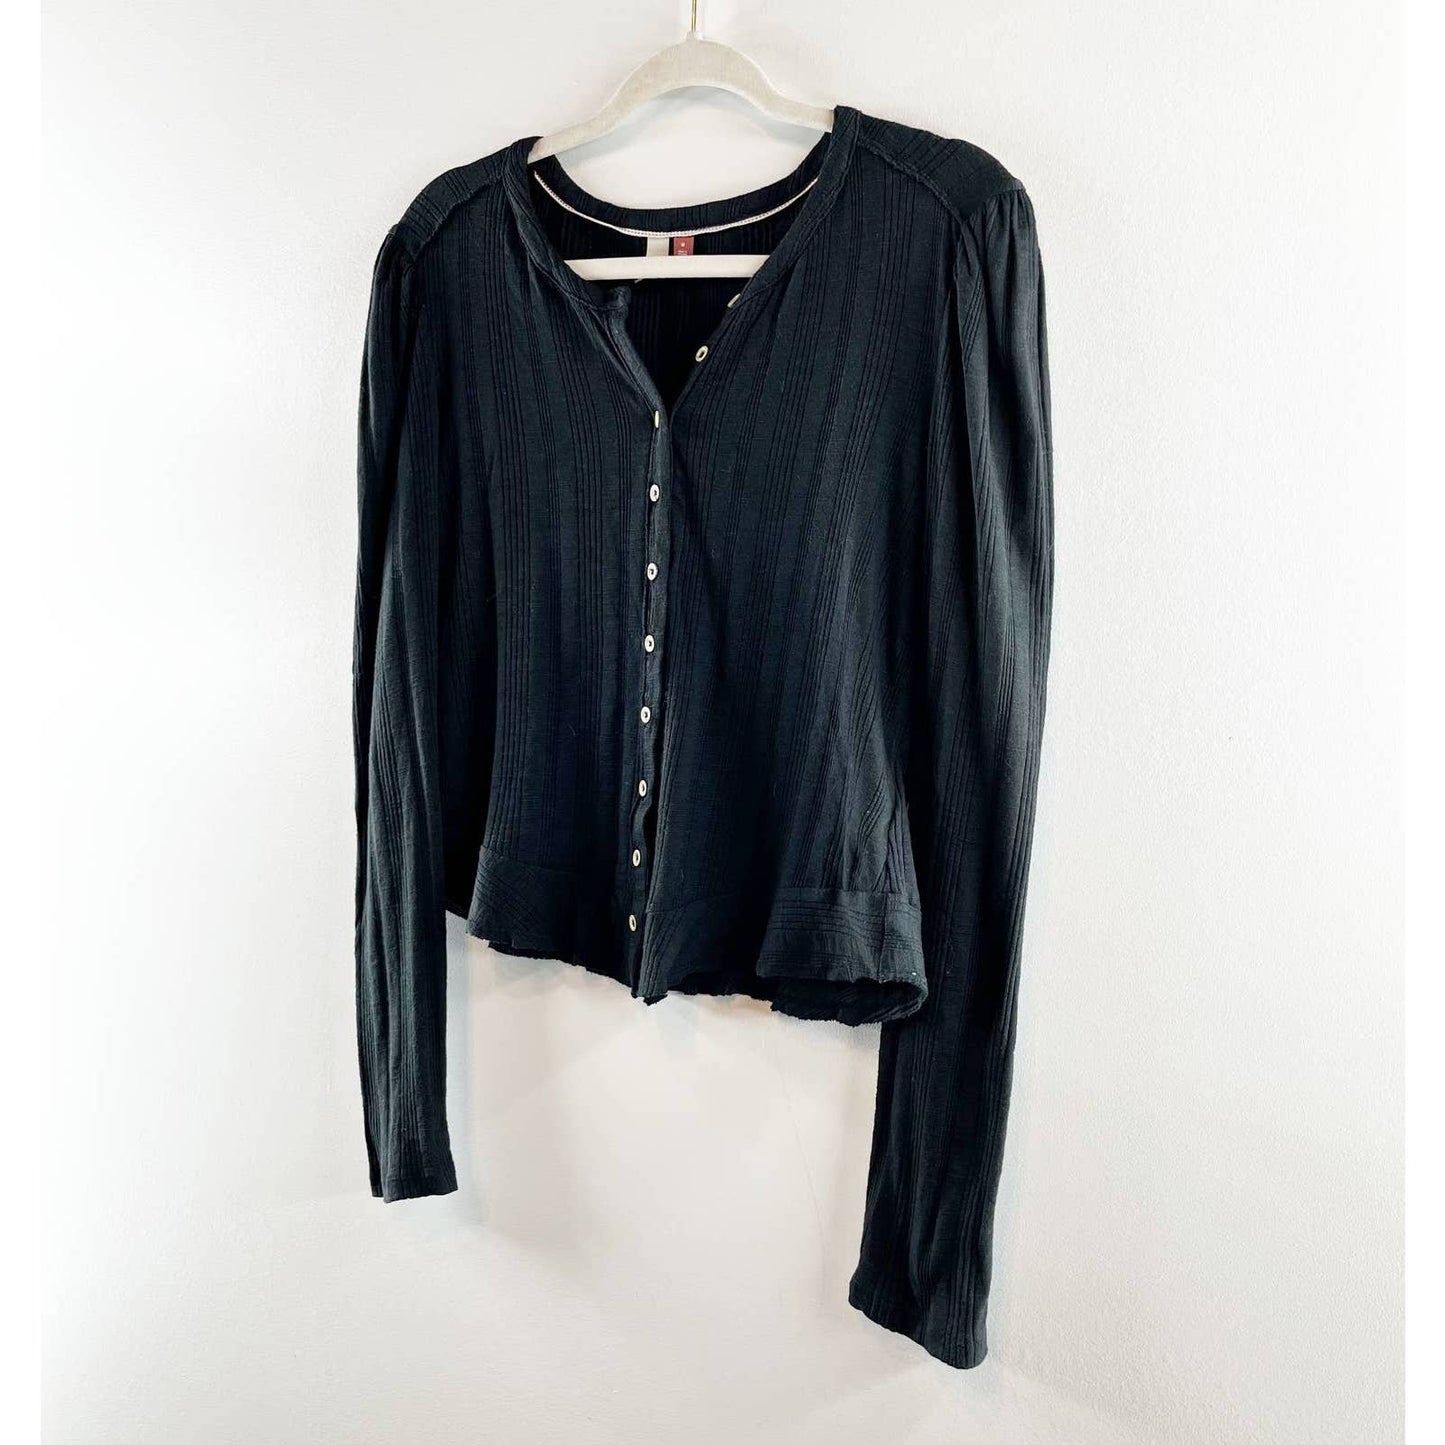 Pilcro Anthropologie Ribbed Puff-Long Sleeved Button Up Top Sweater Black Medium